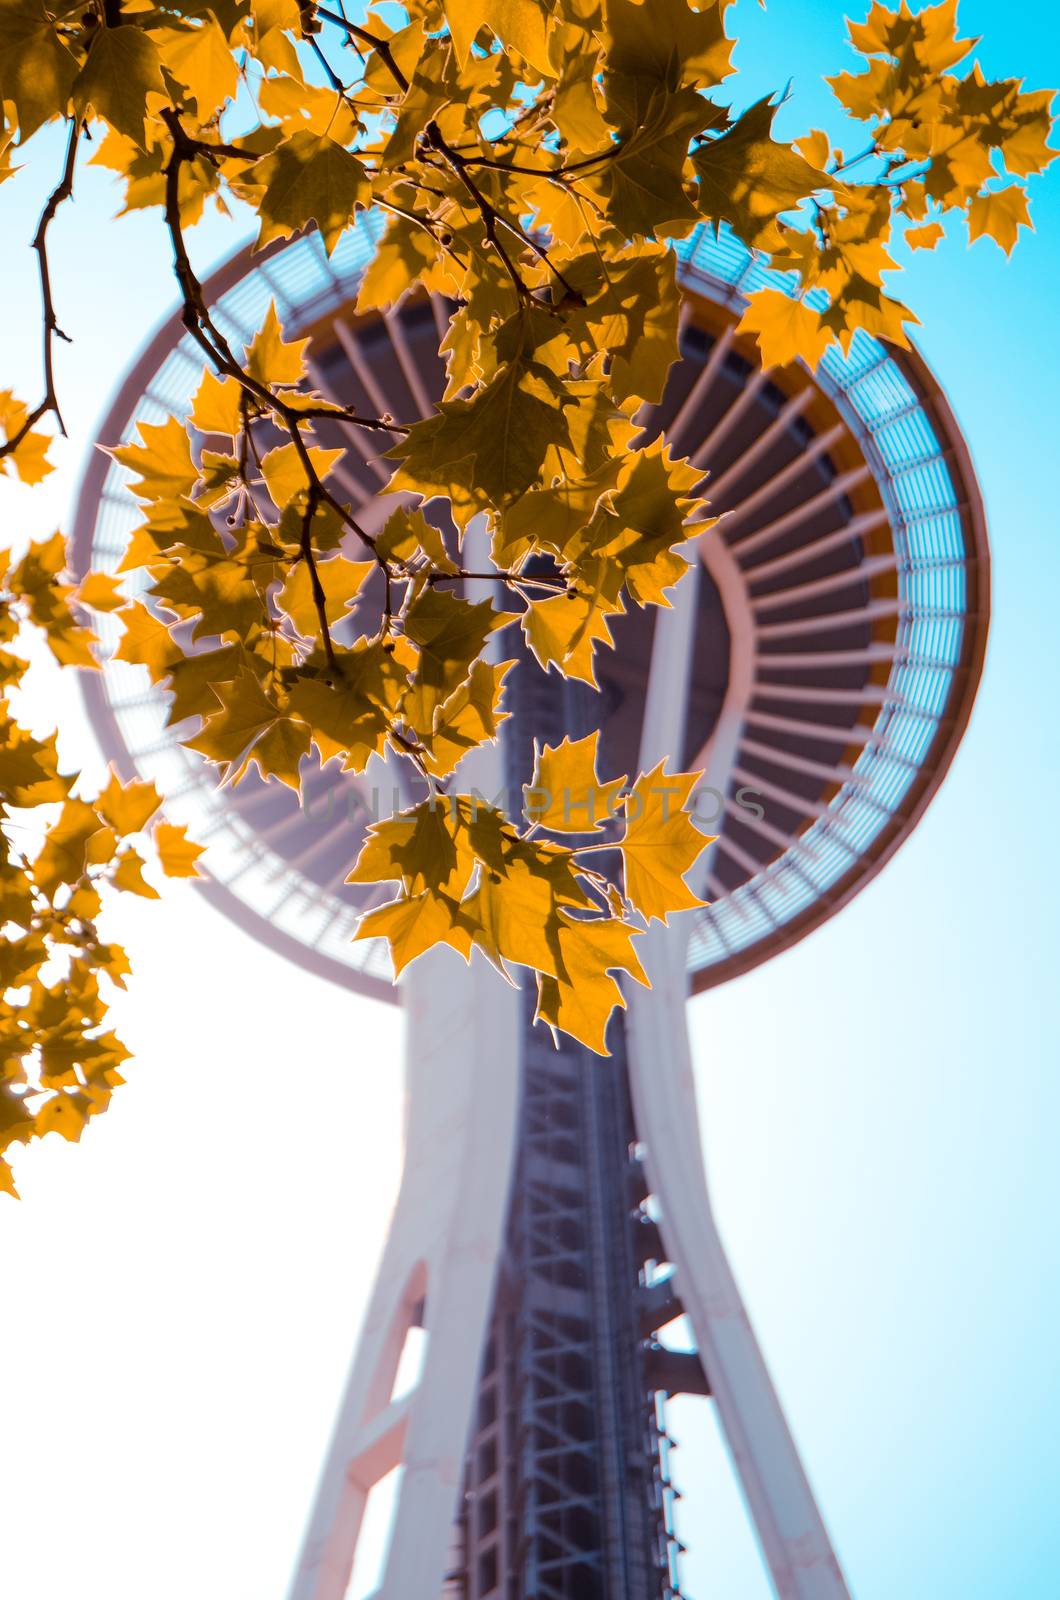 Retro Filtered Photo Of The Seattle Space Needle In The Autumn Or Fall